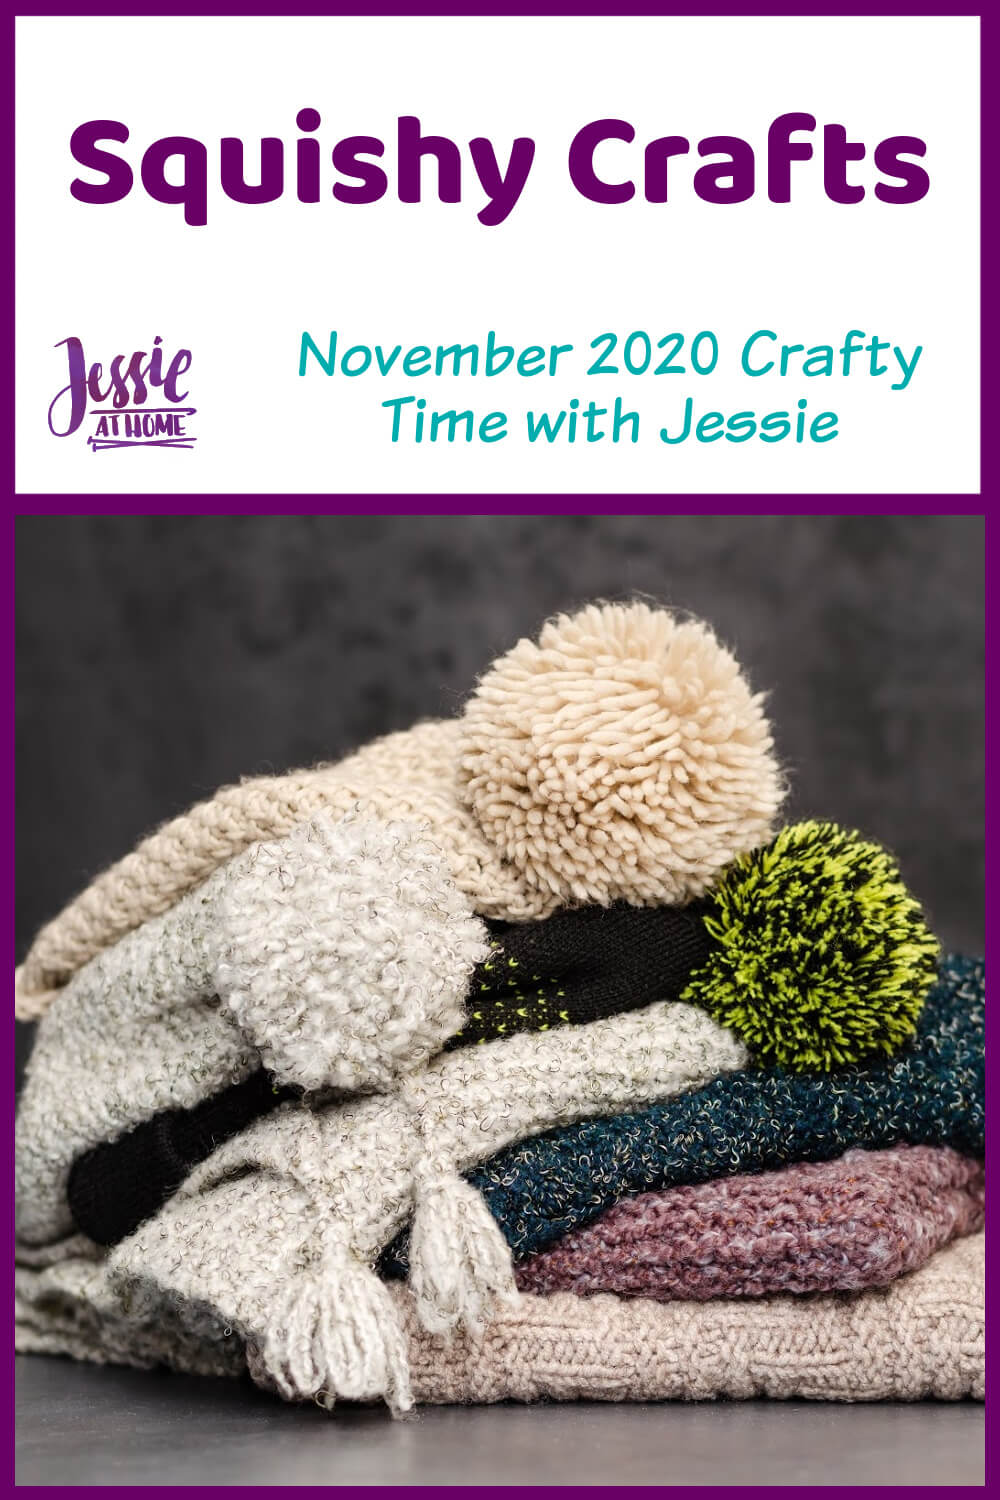 Squishy Crafts - November 2020 Crafty Time with Jessie At Home - Pin 1